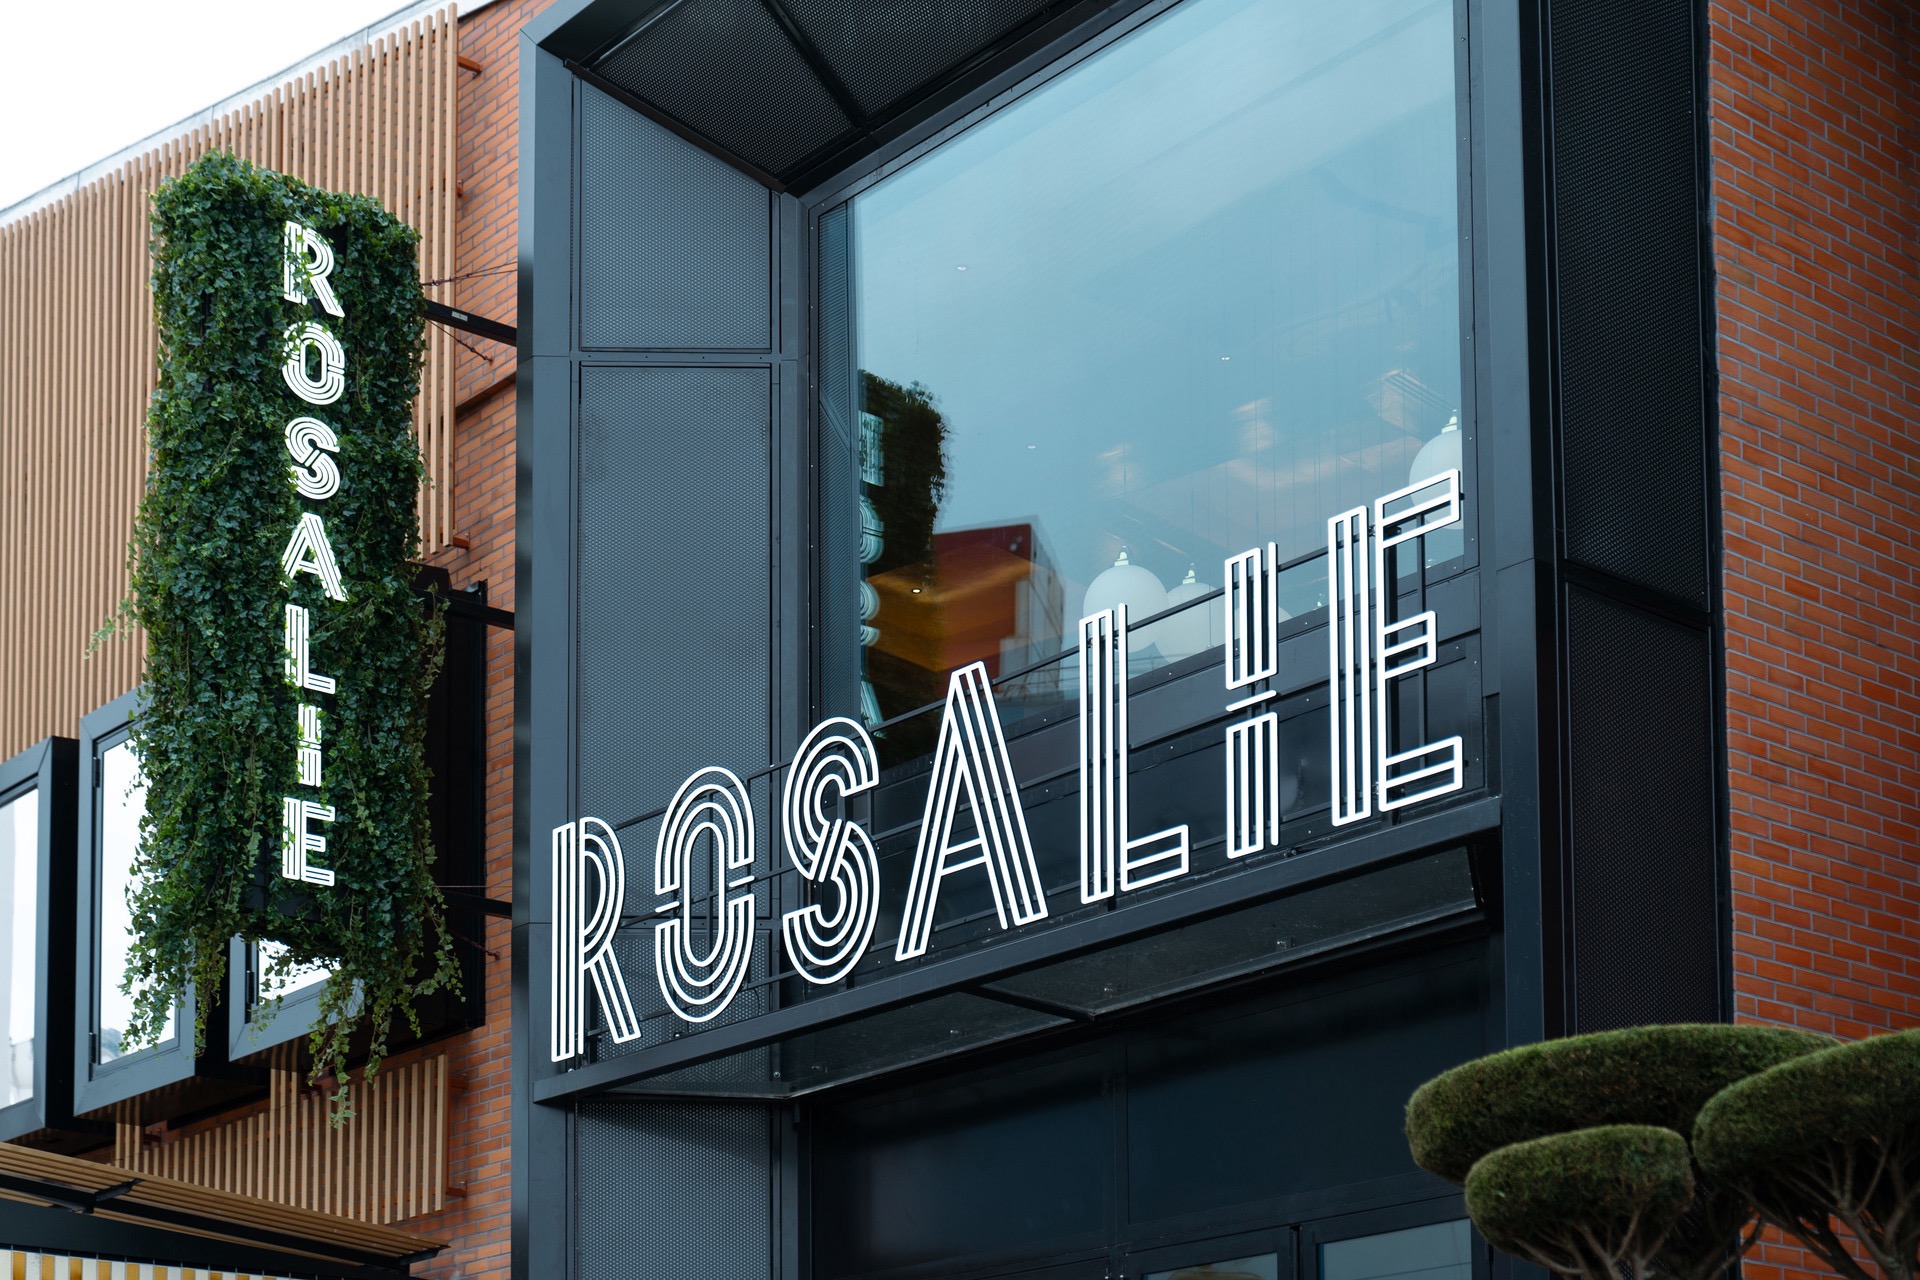 Brasserie Rosalie Opens Today, Experience French Cuisine within the Disney Village, Disneyland Paris